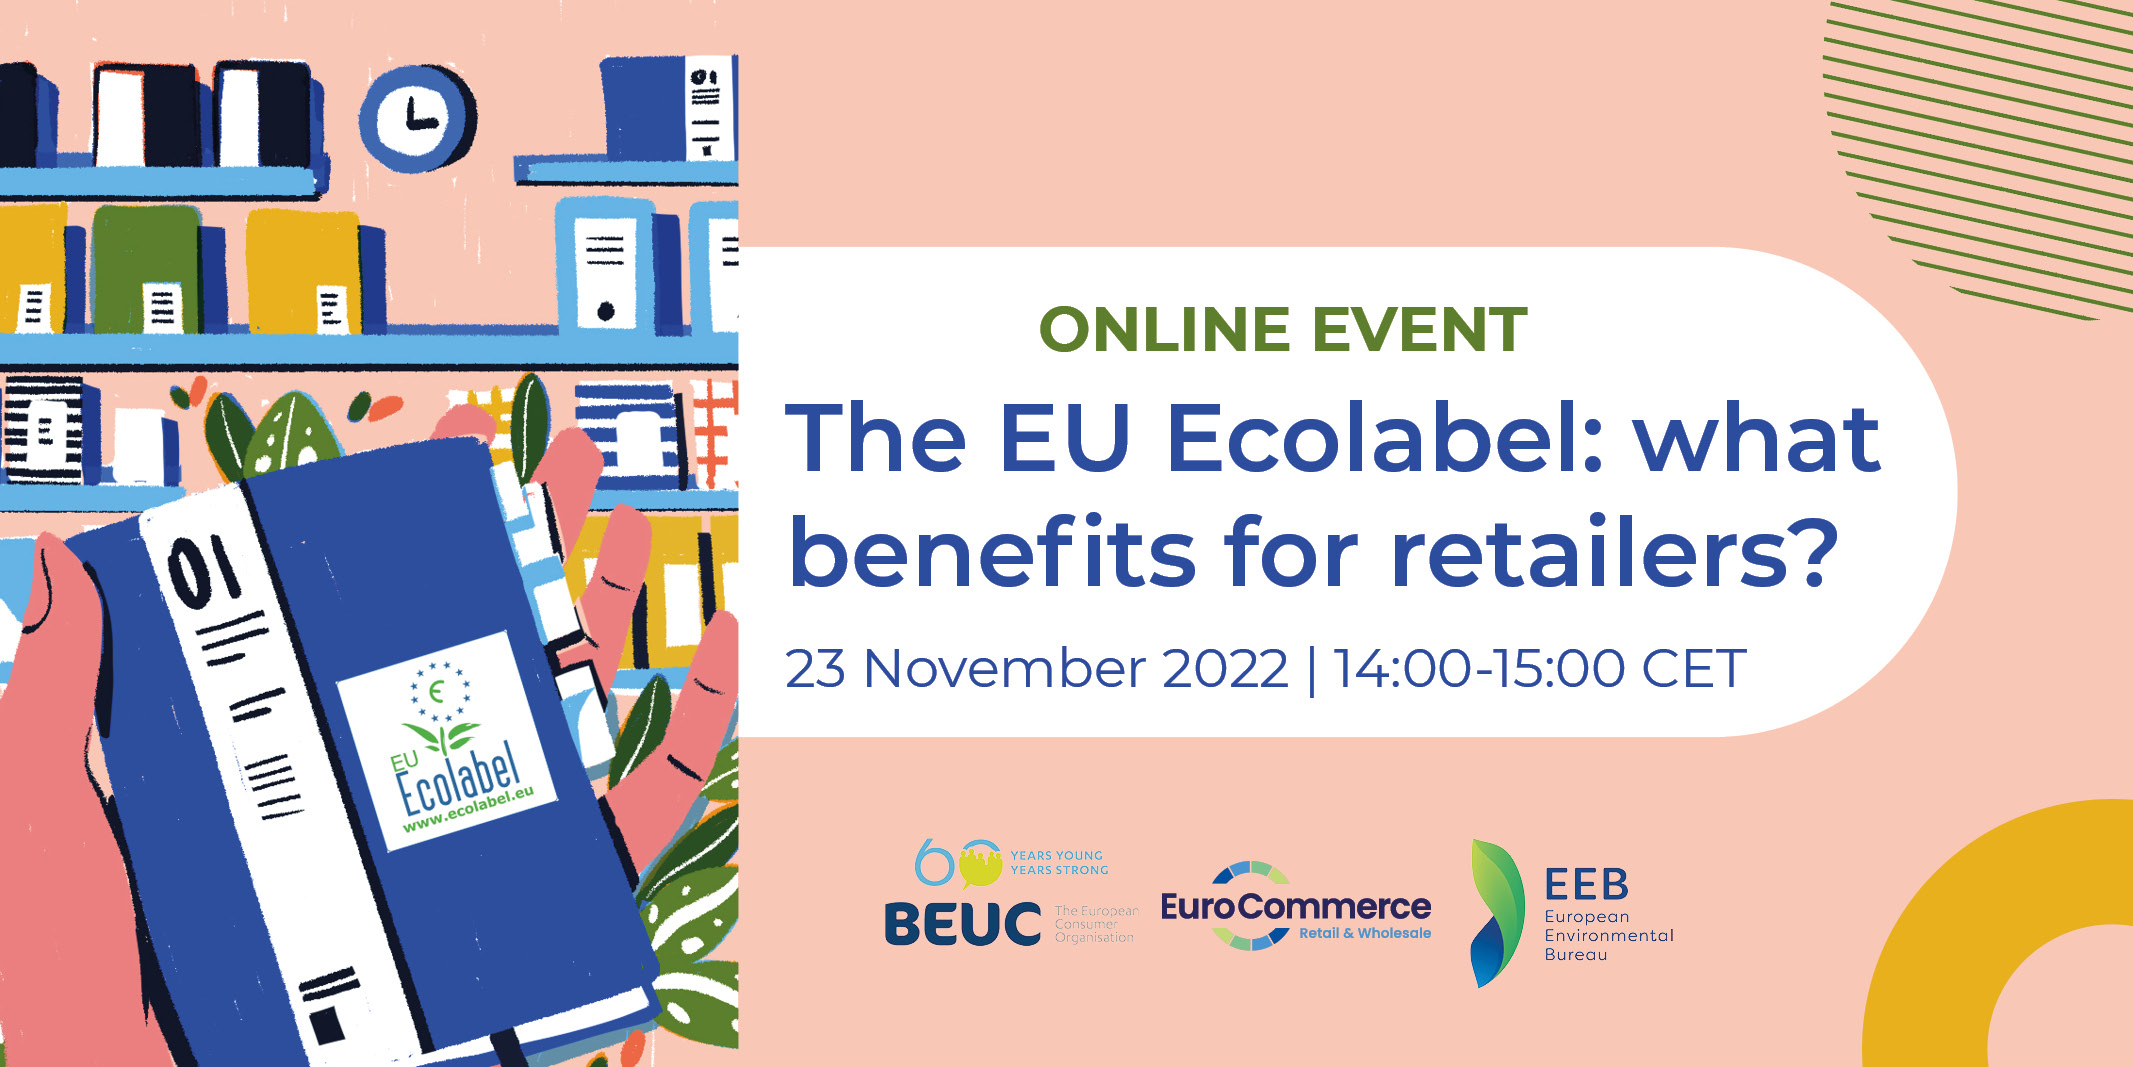 The EU Ecolabel: what benefits for retailers? banner